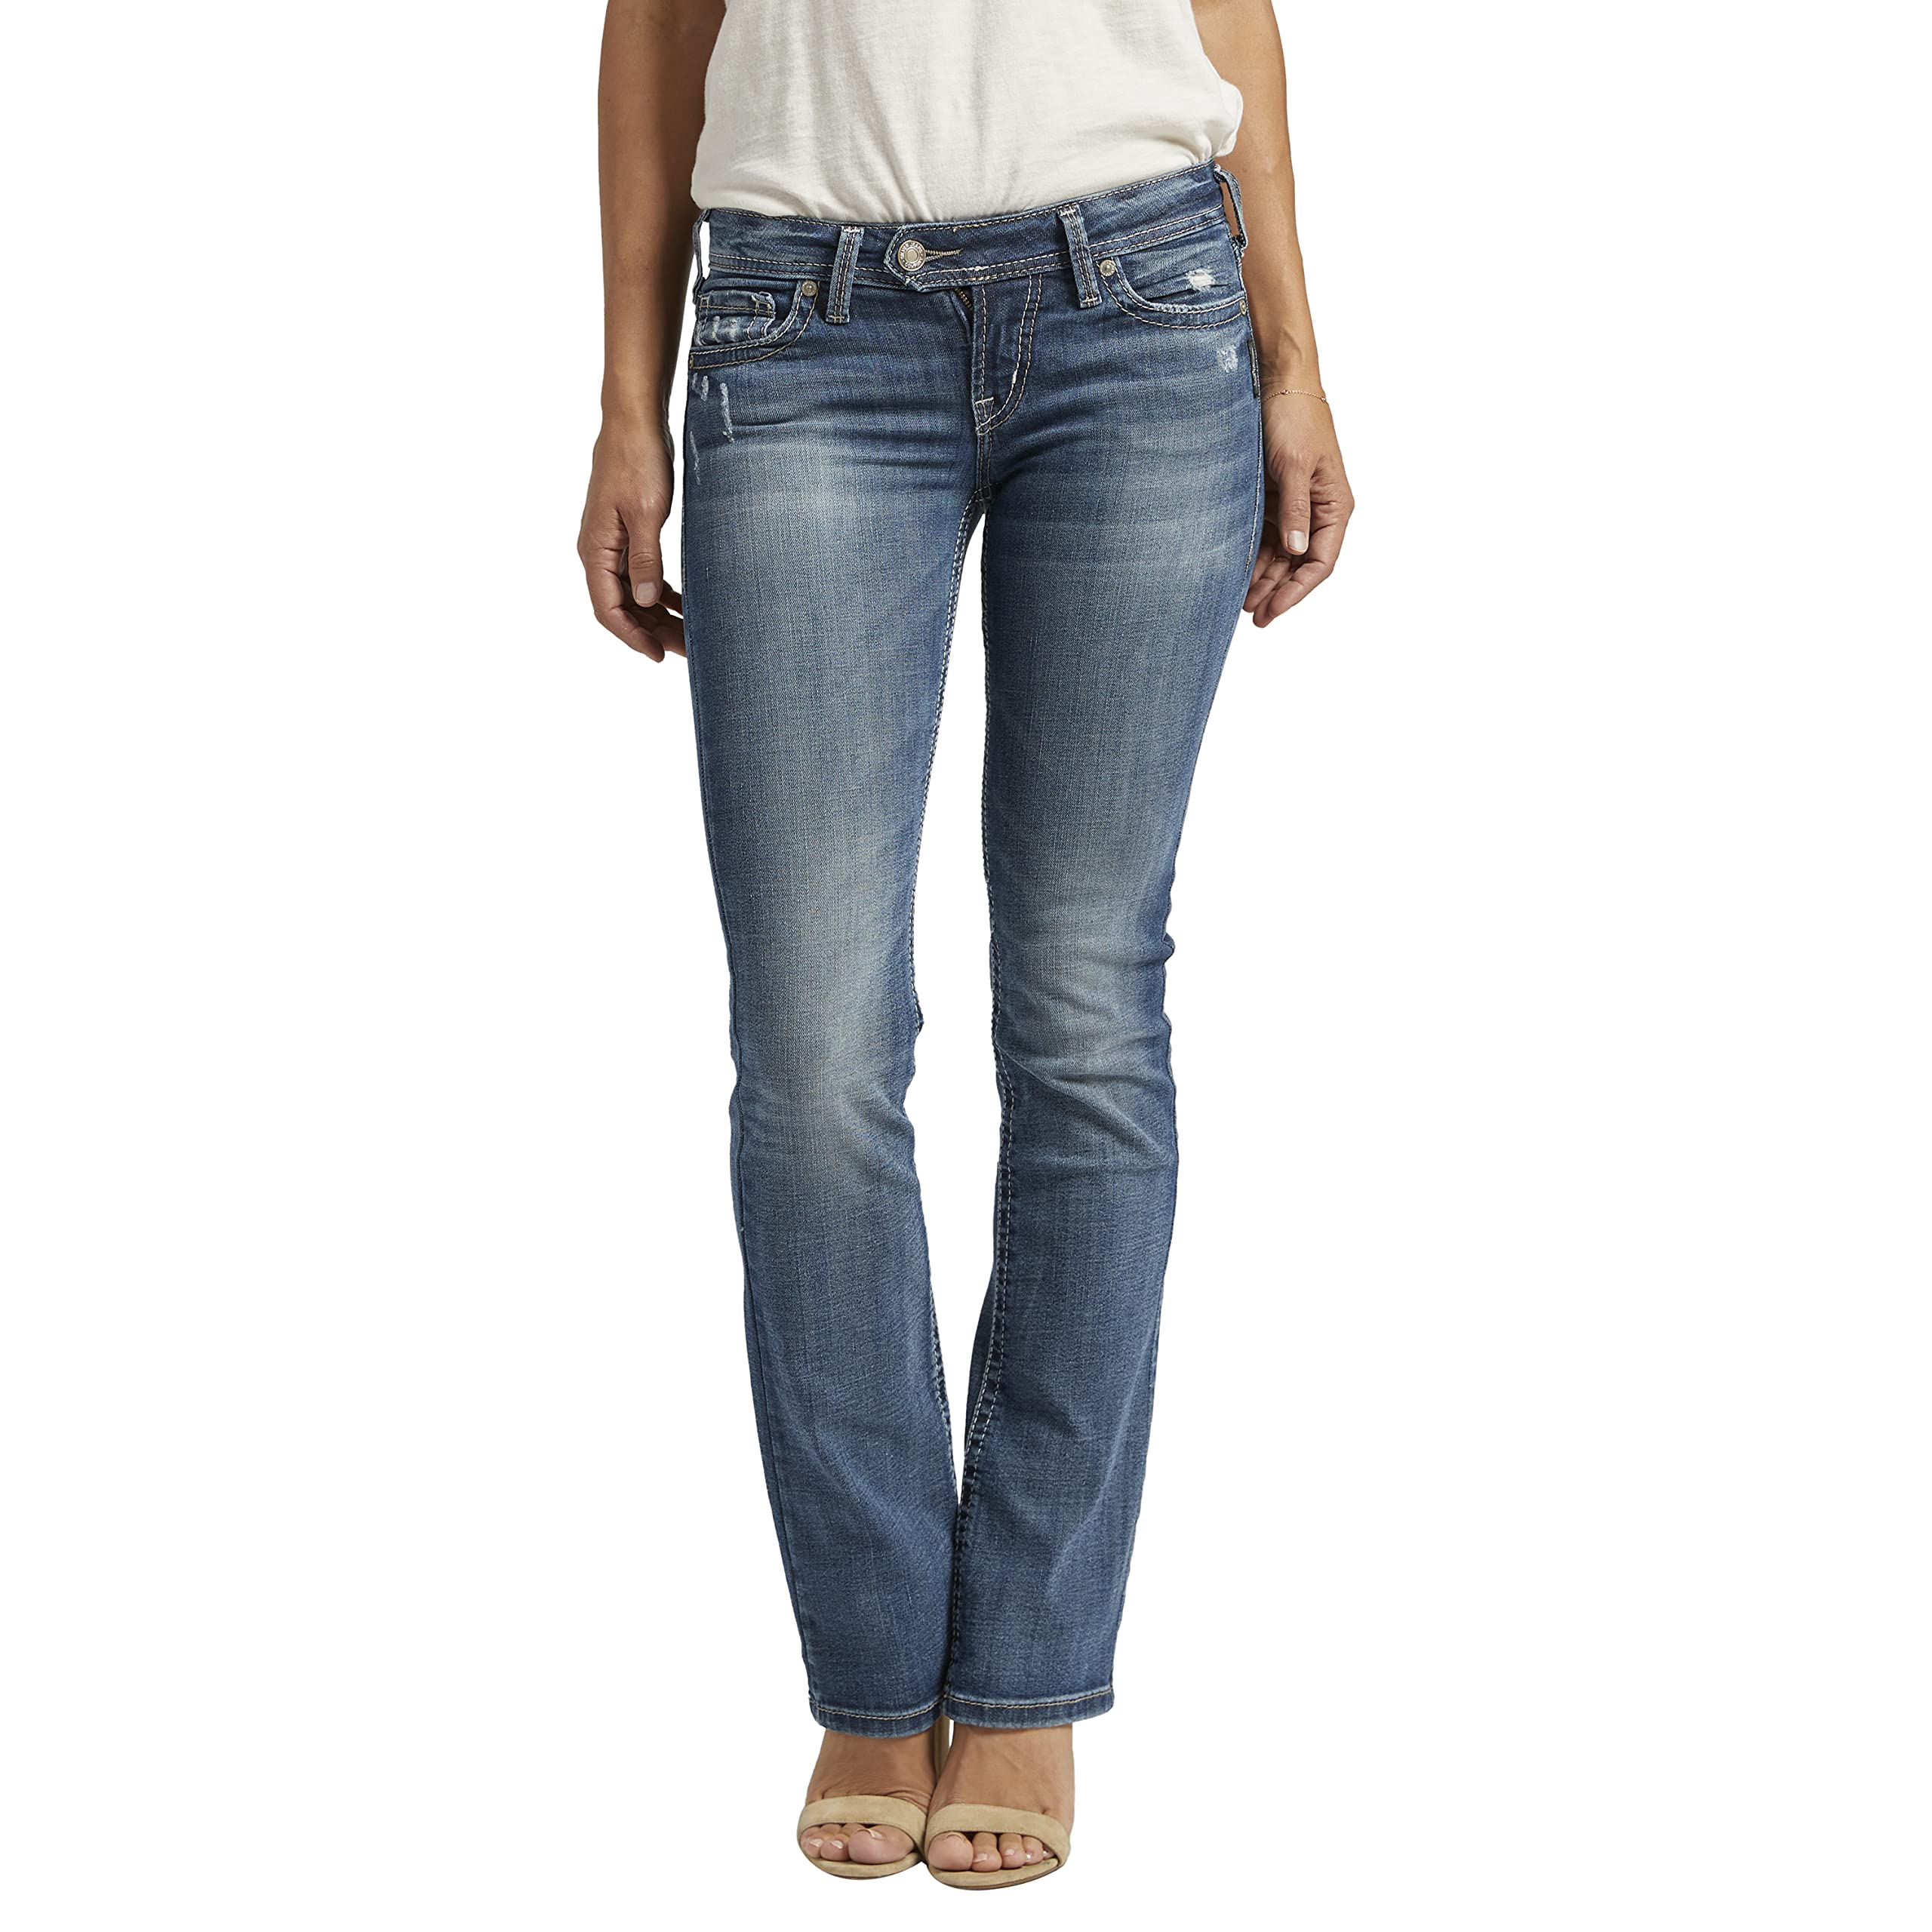 Silver Jeans Co. Women's Tuesday Low Rise Slim Bootcut Jeans